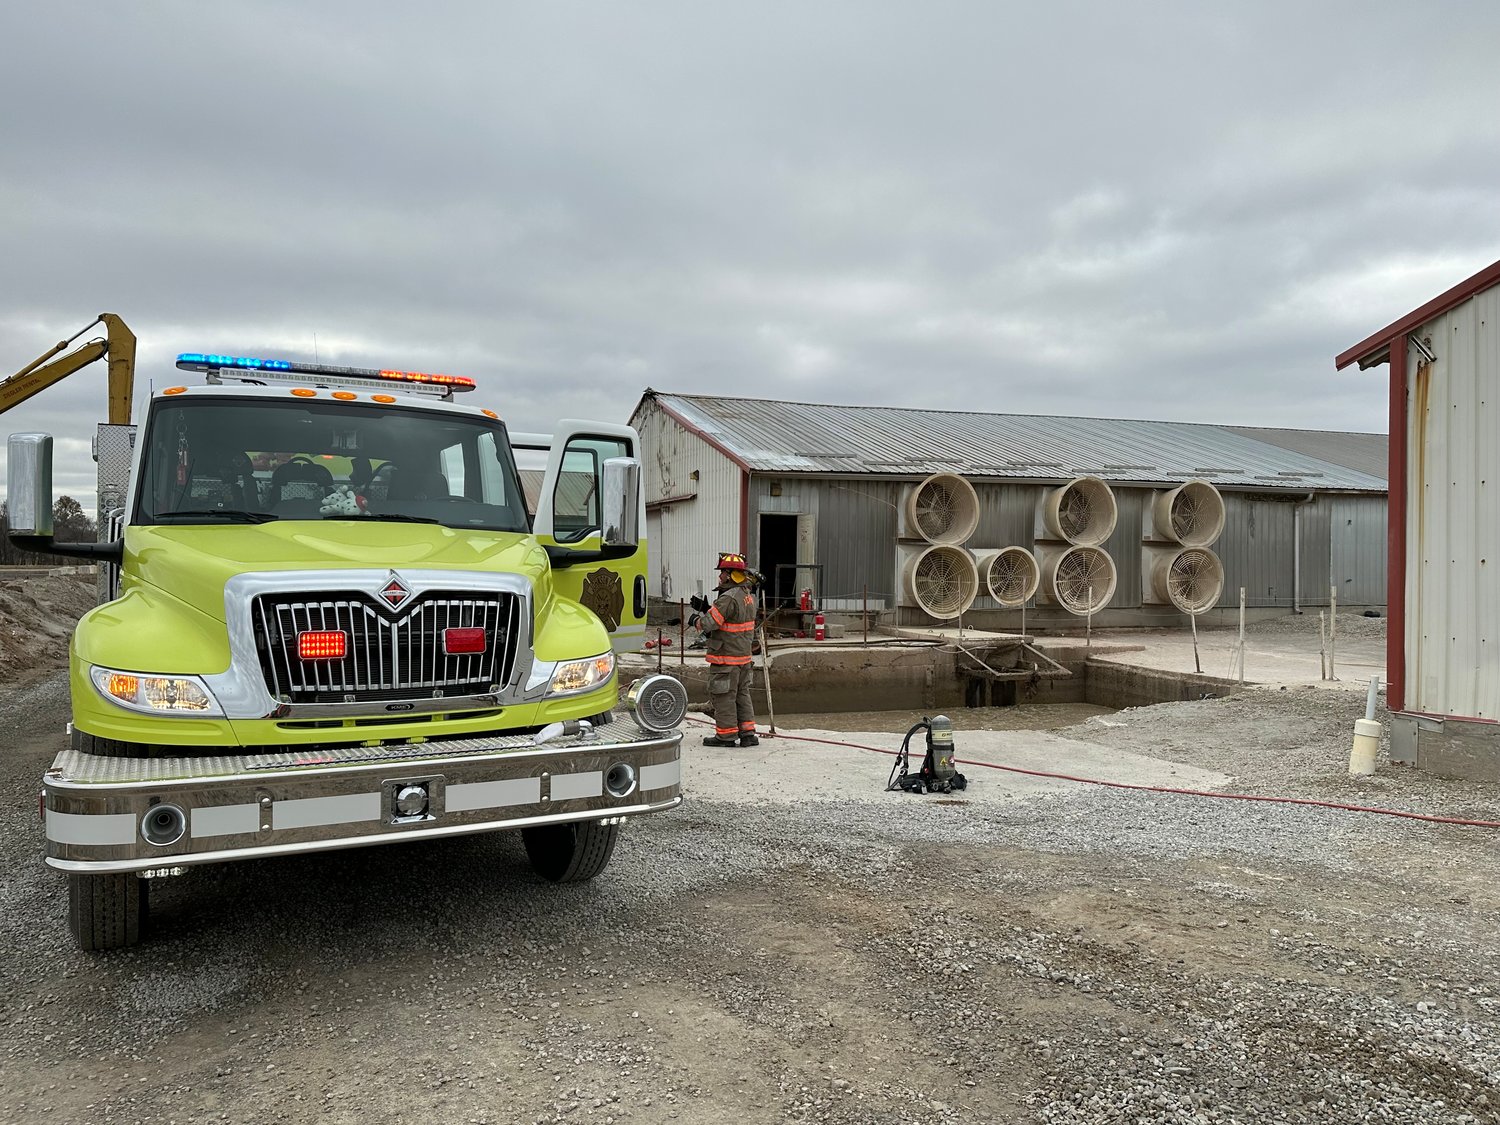 A Johnson County Fire Protection District truck is seen on Saturday, Nov. 12 at Rose Acre Farms.